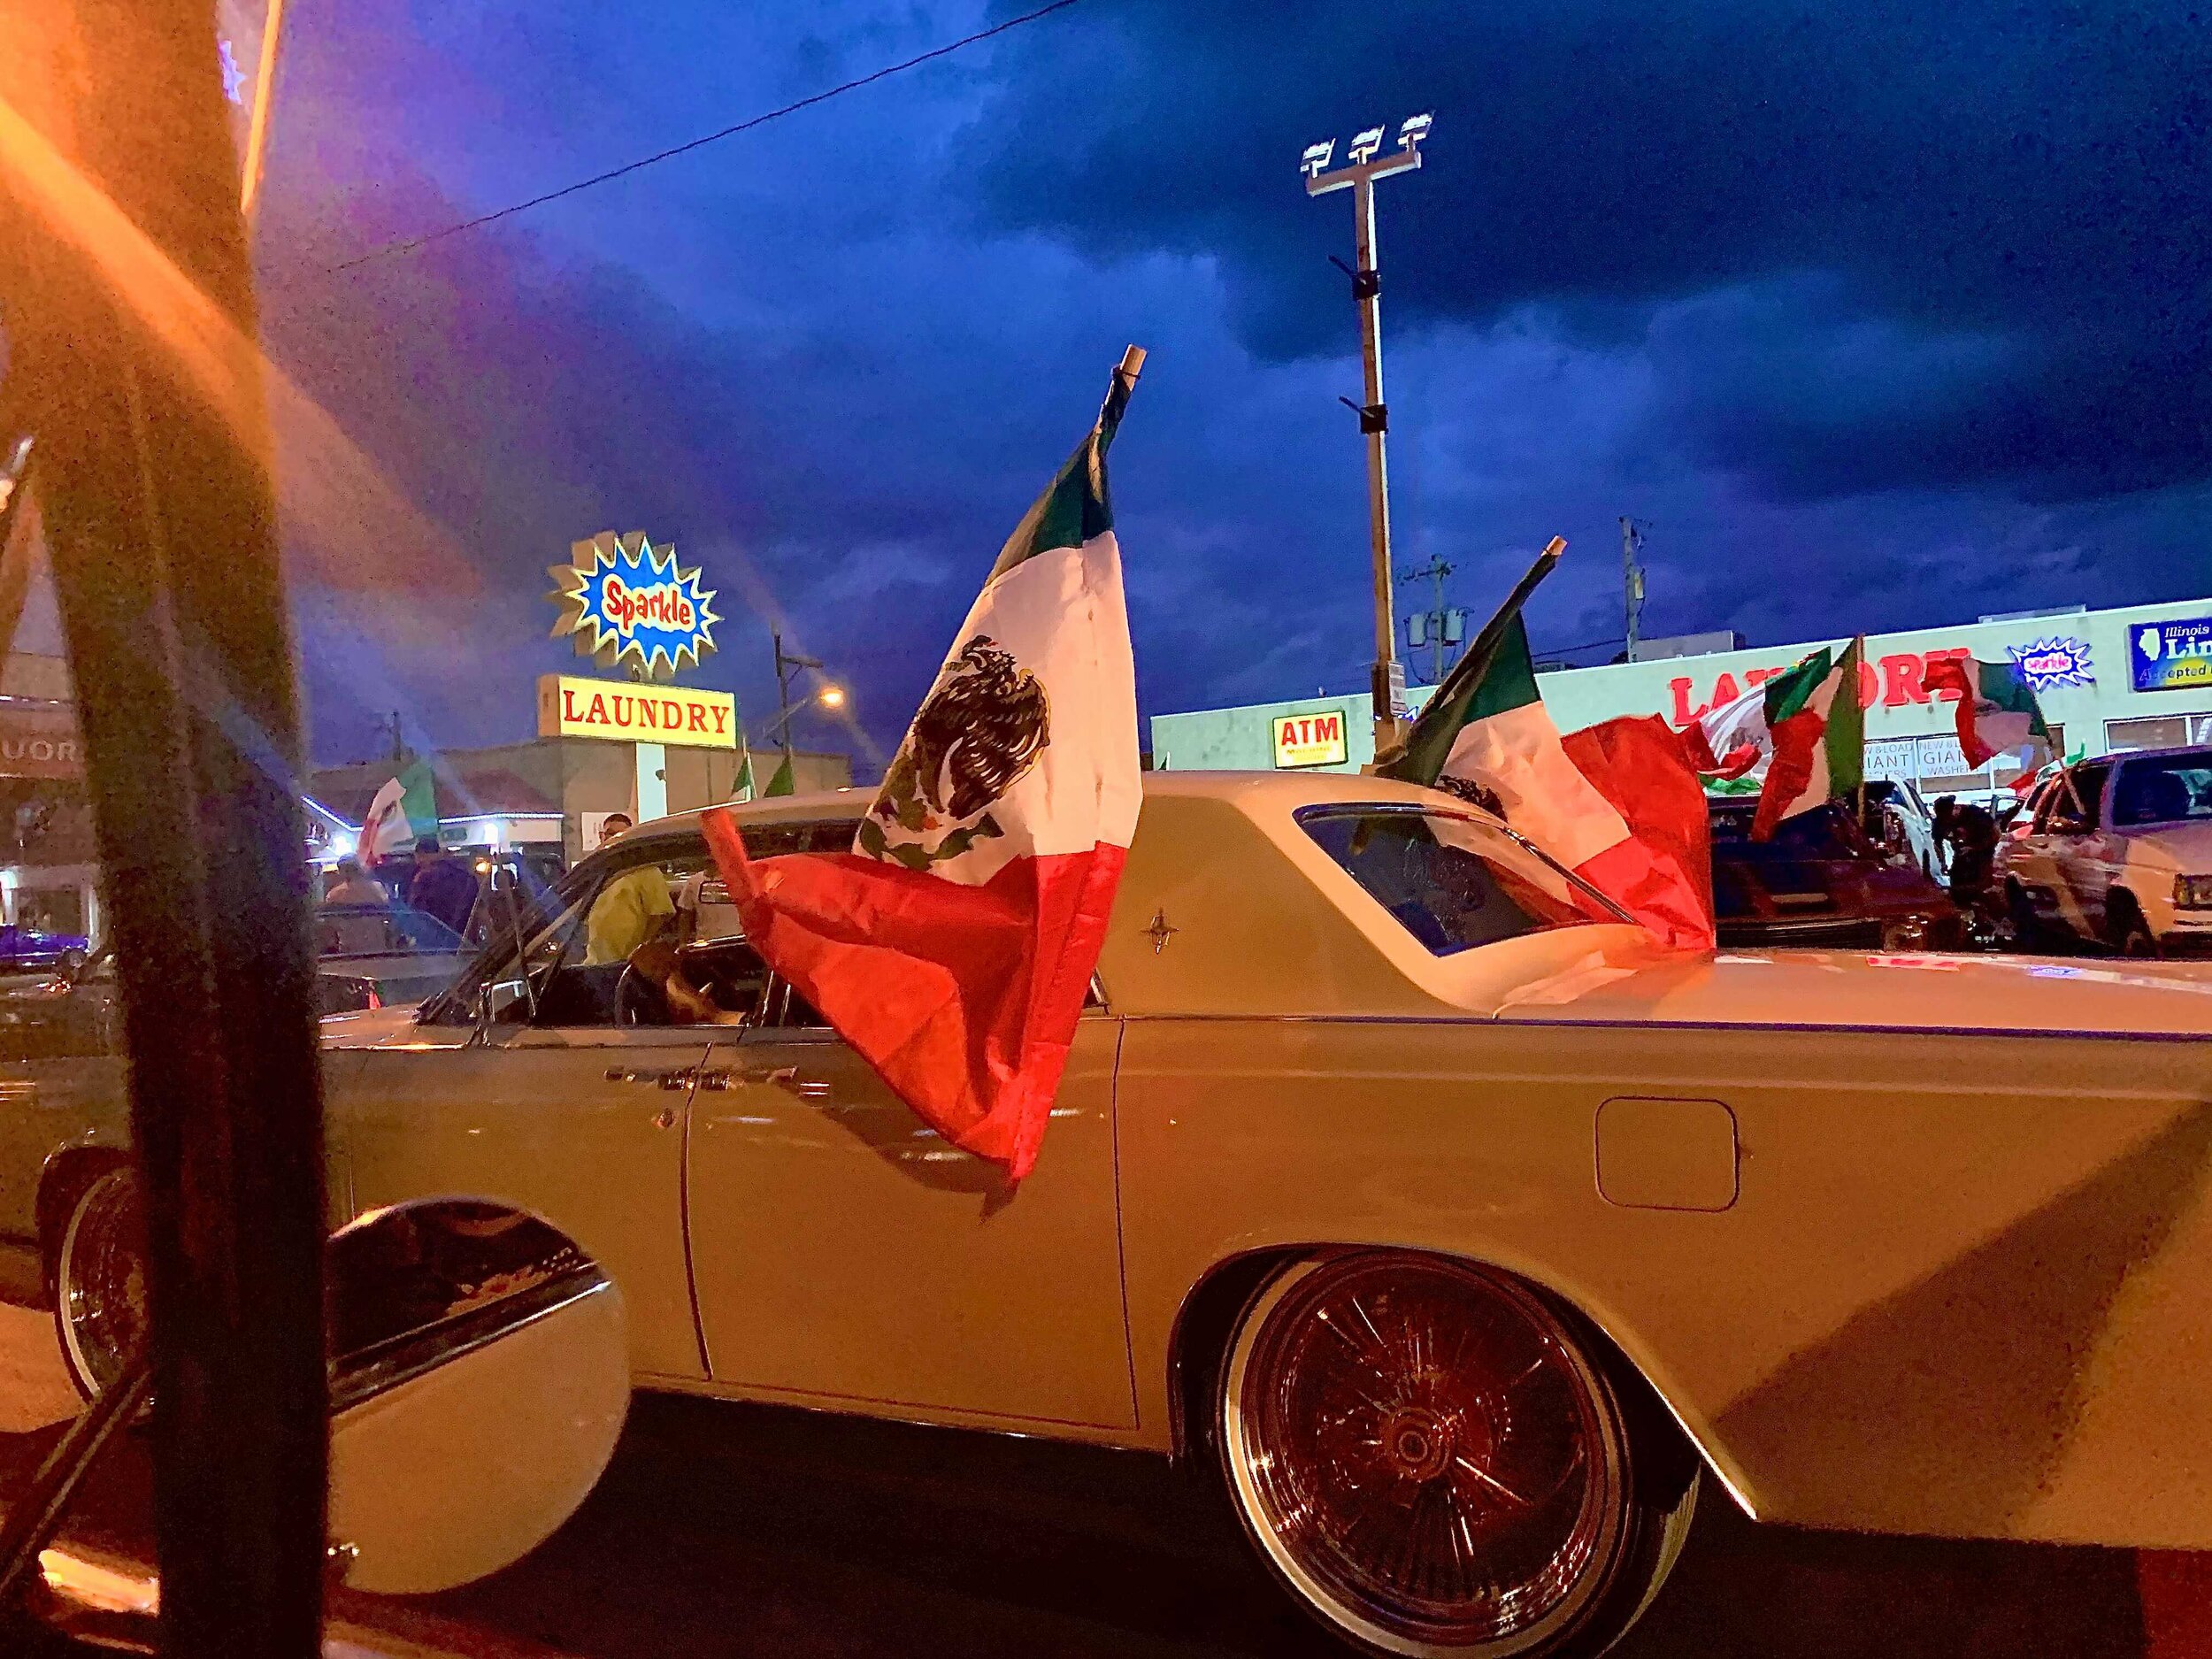  Every antique car was decorated with Mexican flags. 